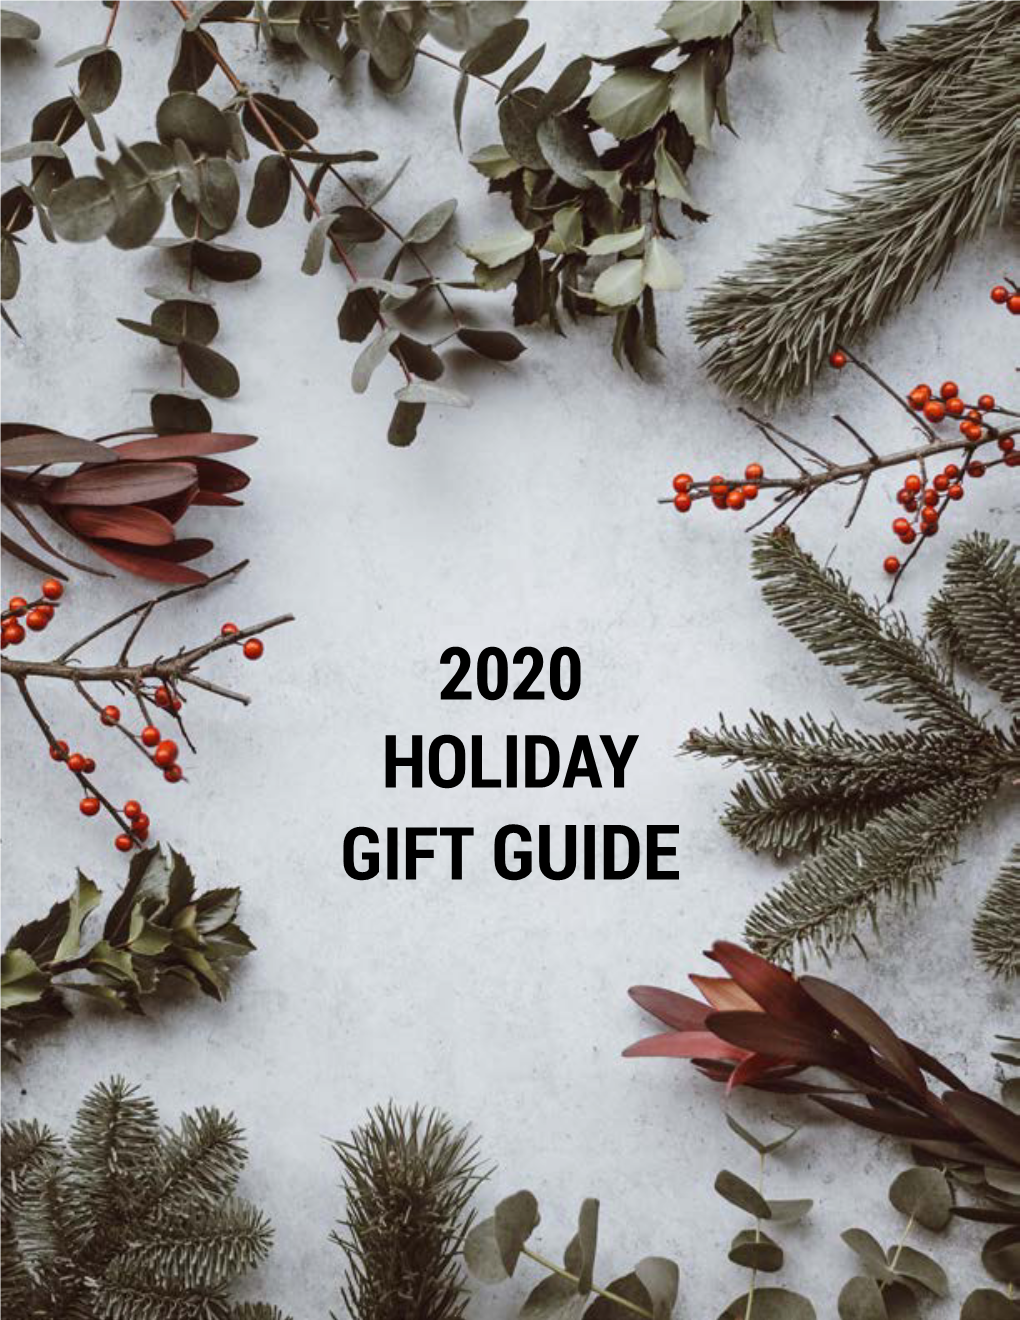 2020 HOLIDAY GIFT GUIDE Decorations for the Whole Family, Even the Furry Ones